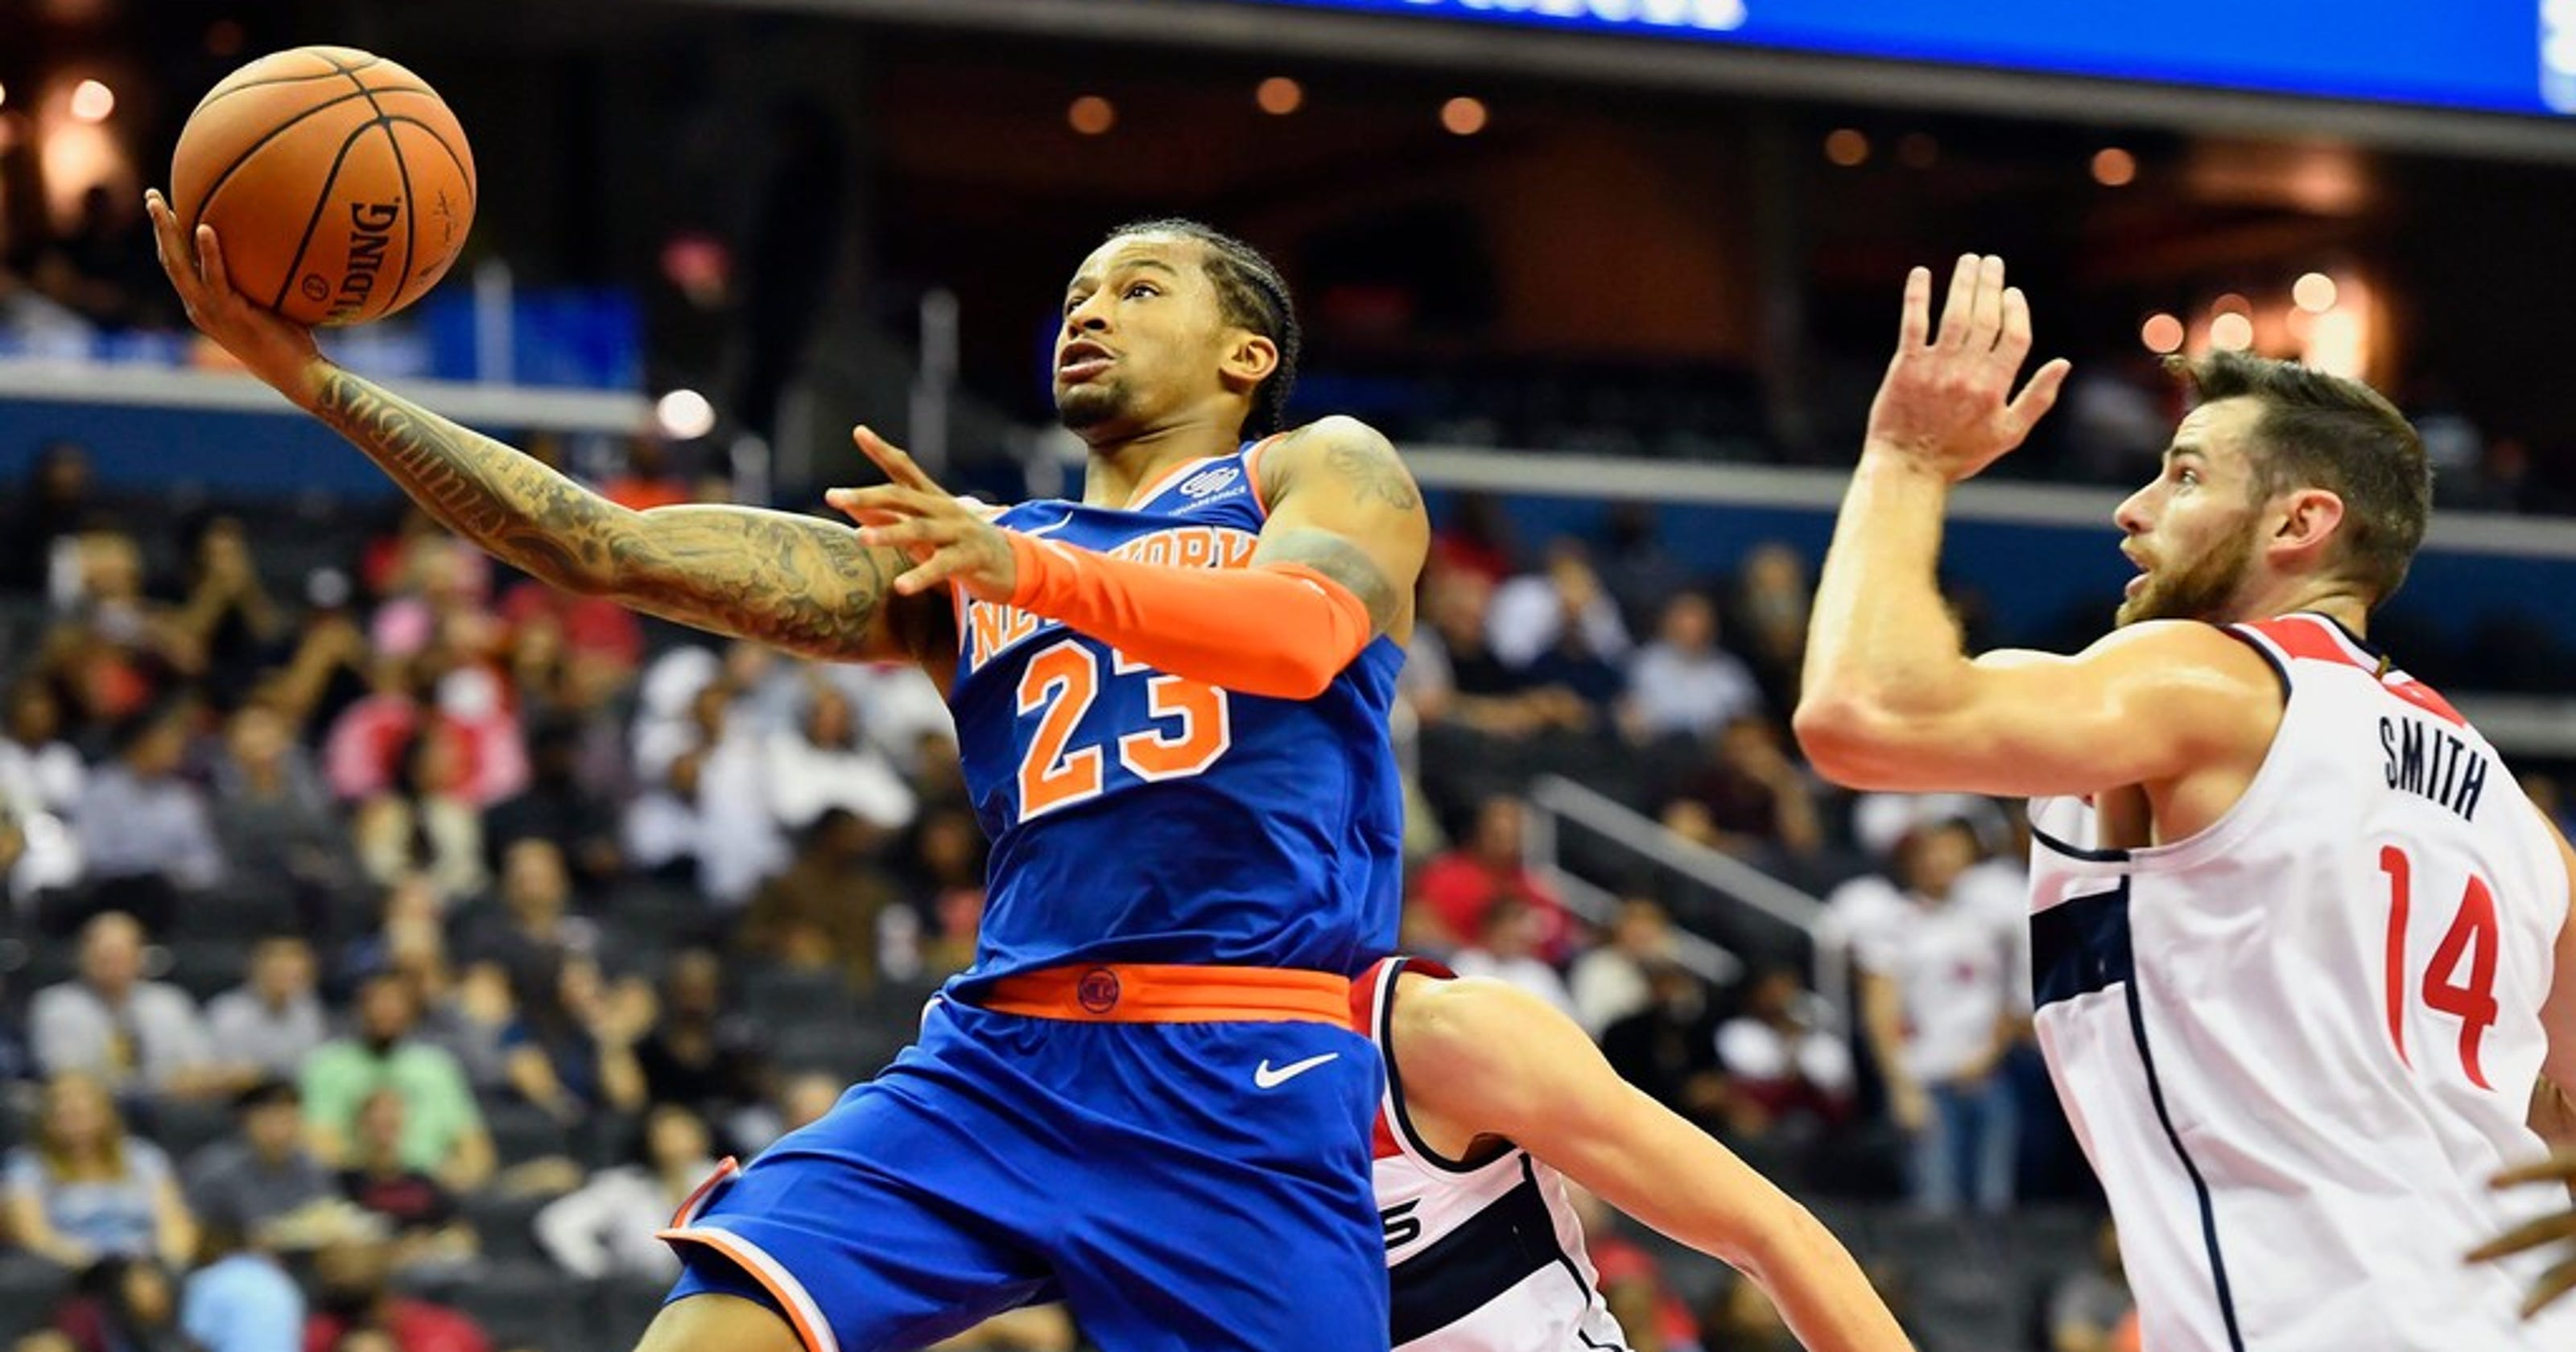 New York Knicks Some roster changes heading into game vs. Nets